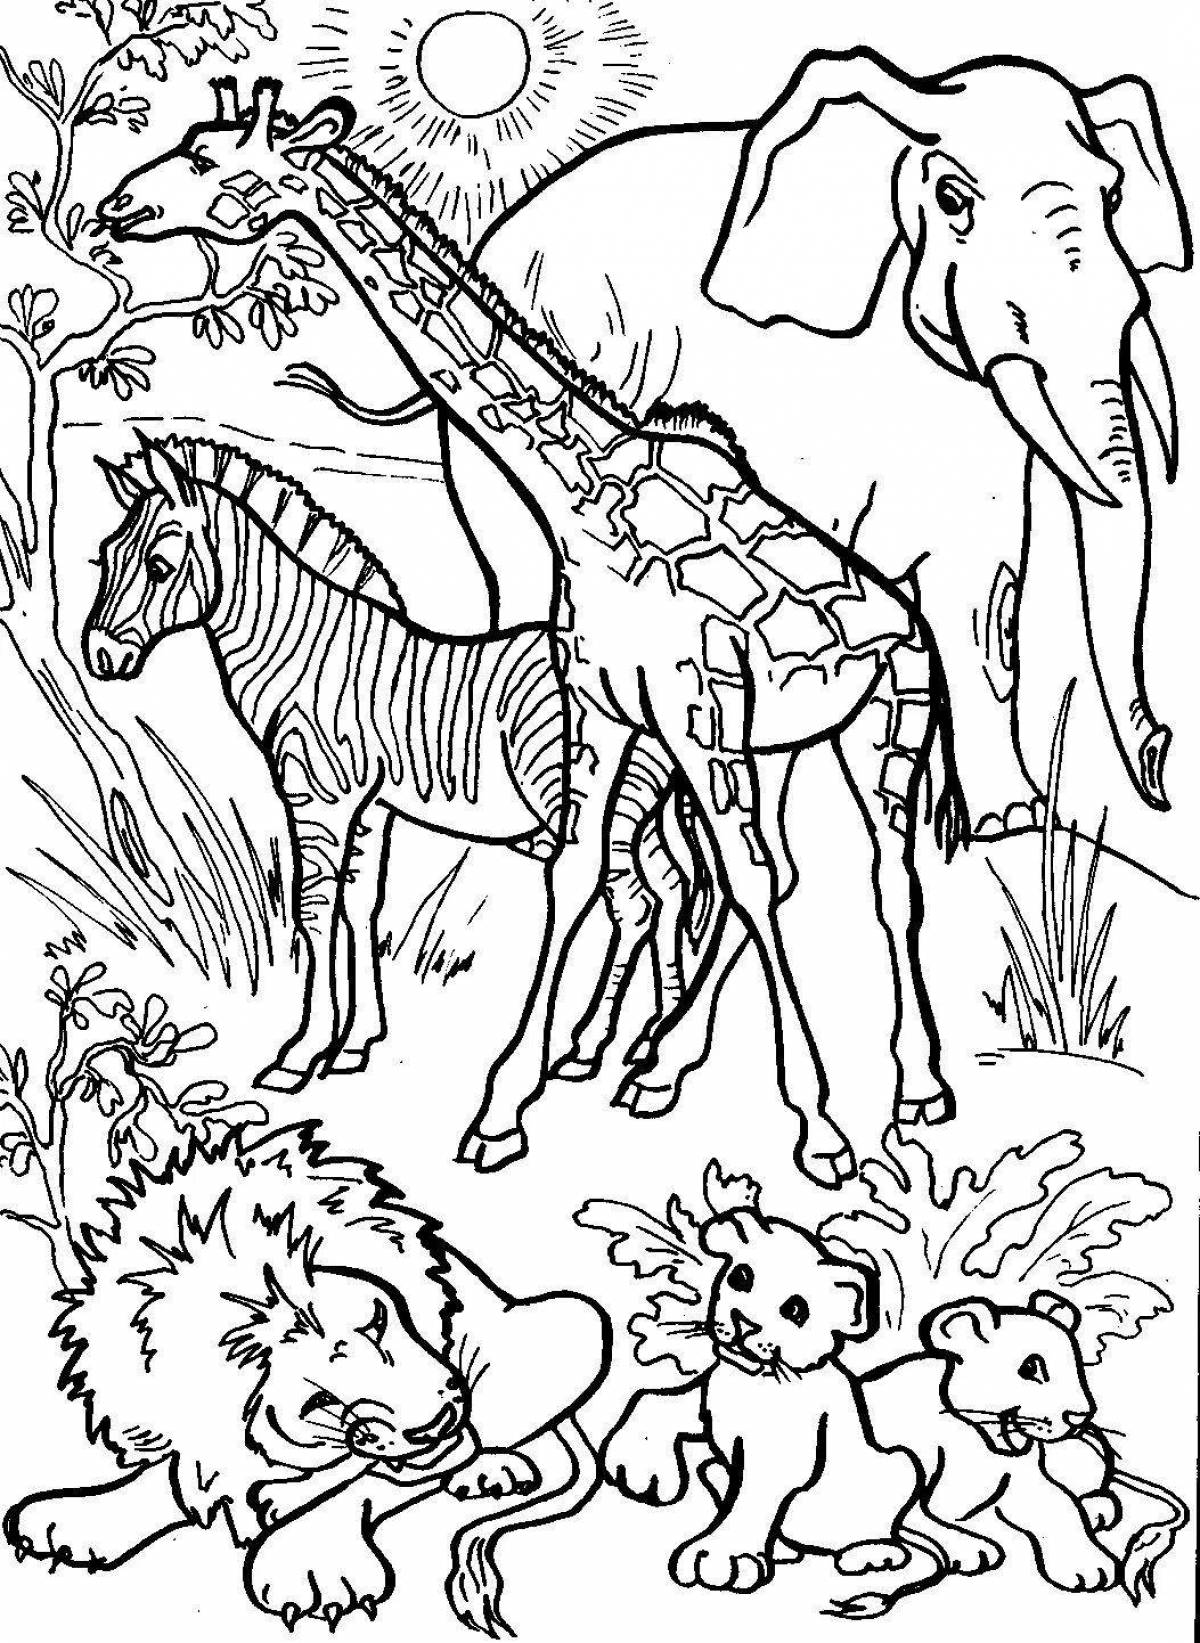 Coloring pages animals of hot and cold countries for preschoolers